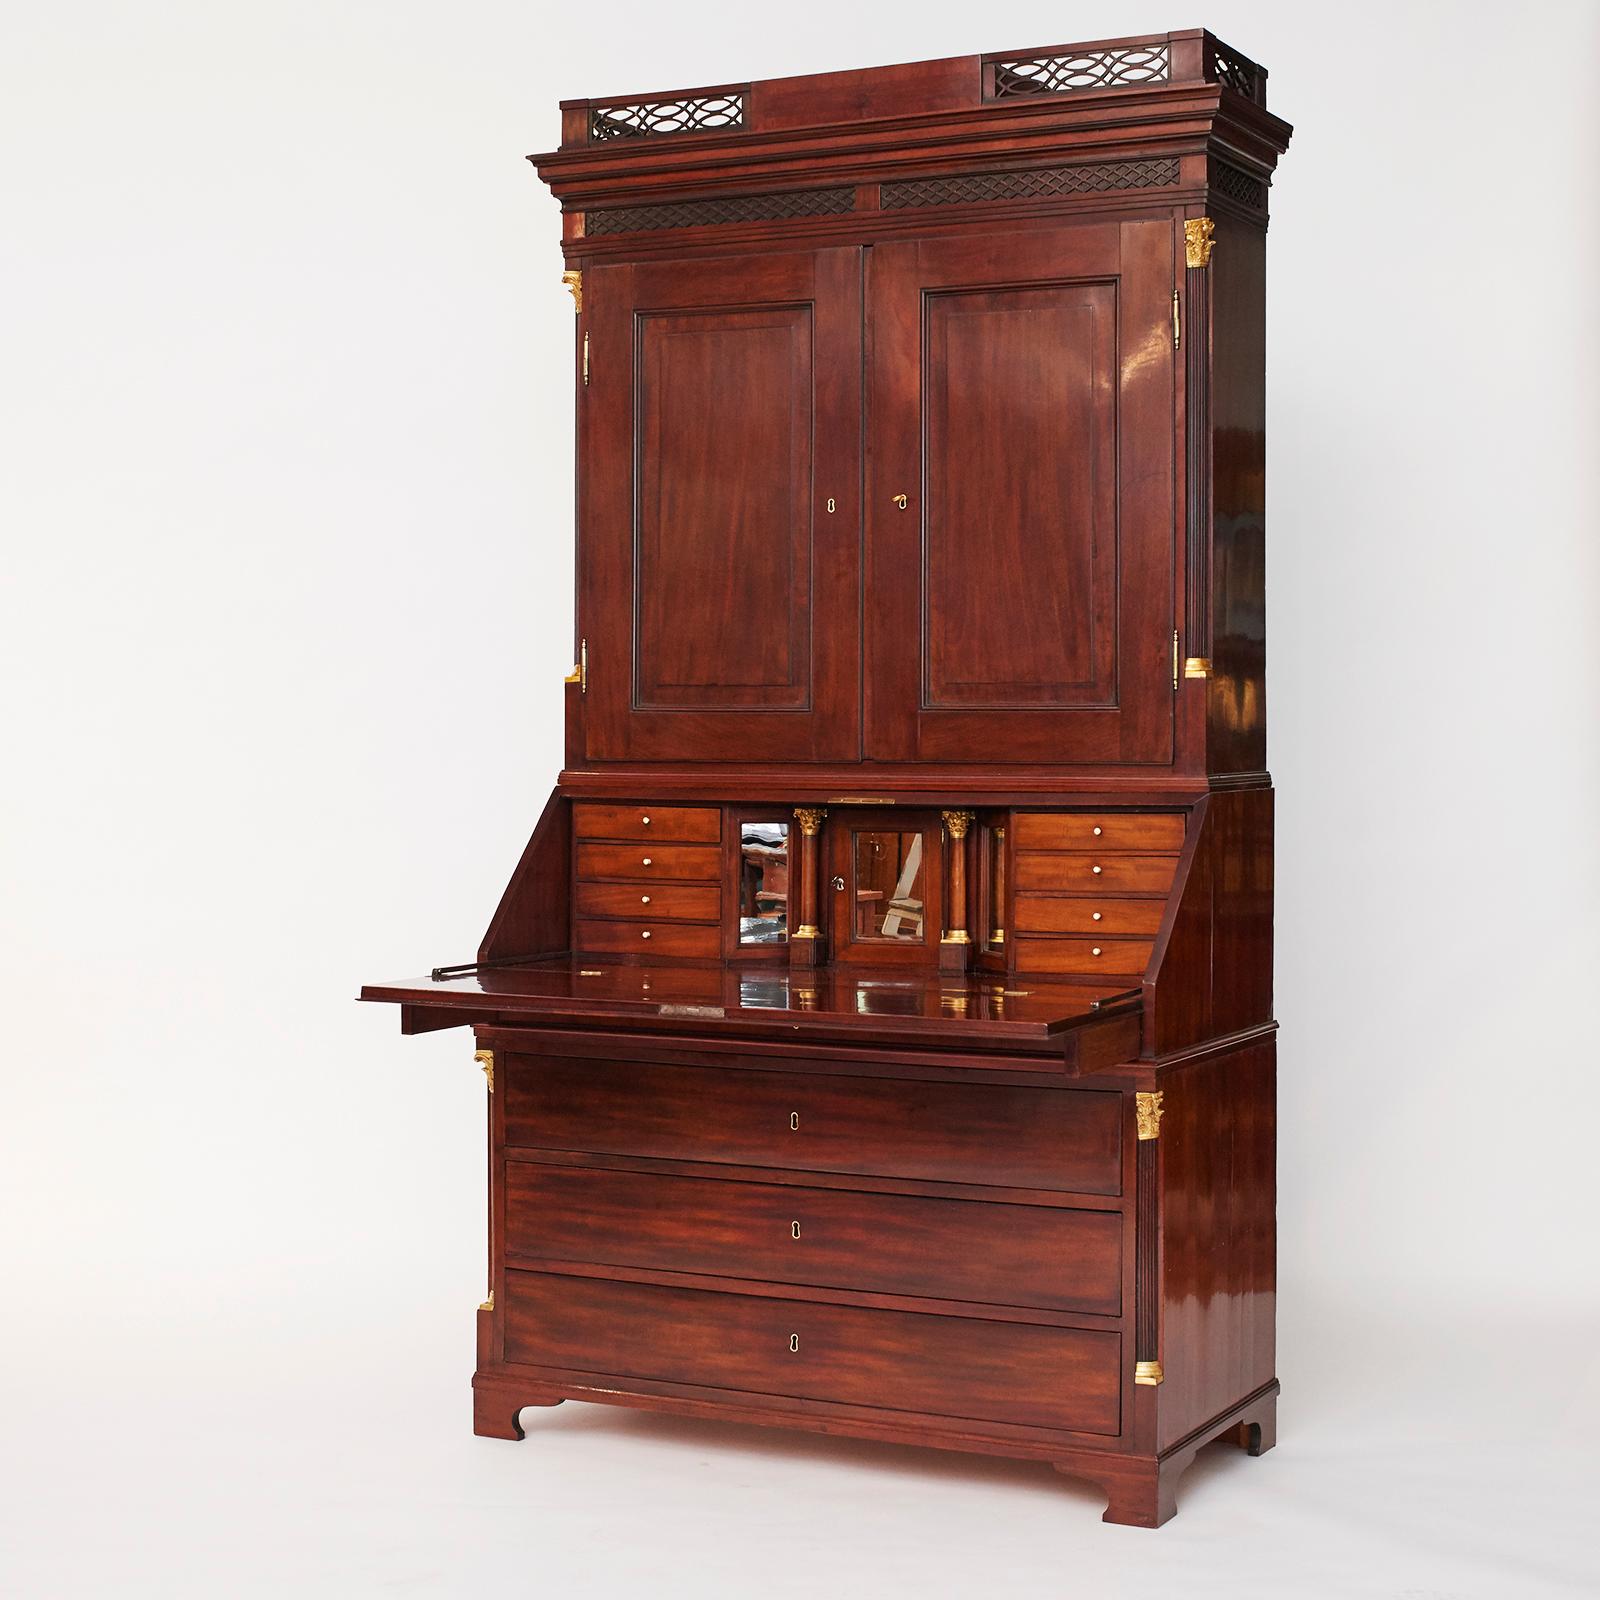 Danish Louis XVI bureau, mahogany. High-quality craftsmanship. Original condition, carefully restored. Top cabinet with detailing wood carvings. Top and bottom cabinet flanked by quarter-columns with gilded bronze capitals. Writing flap enclosing